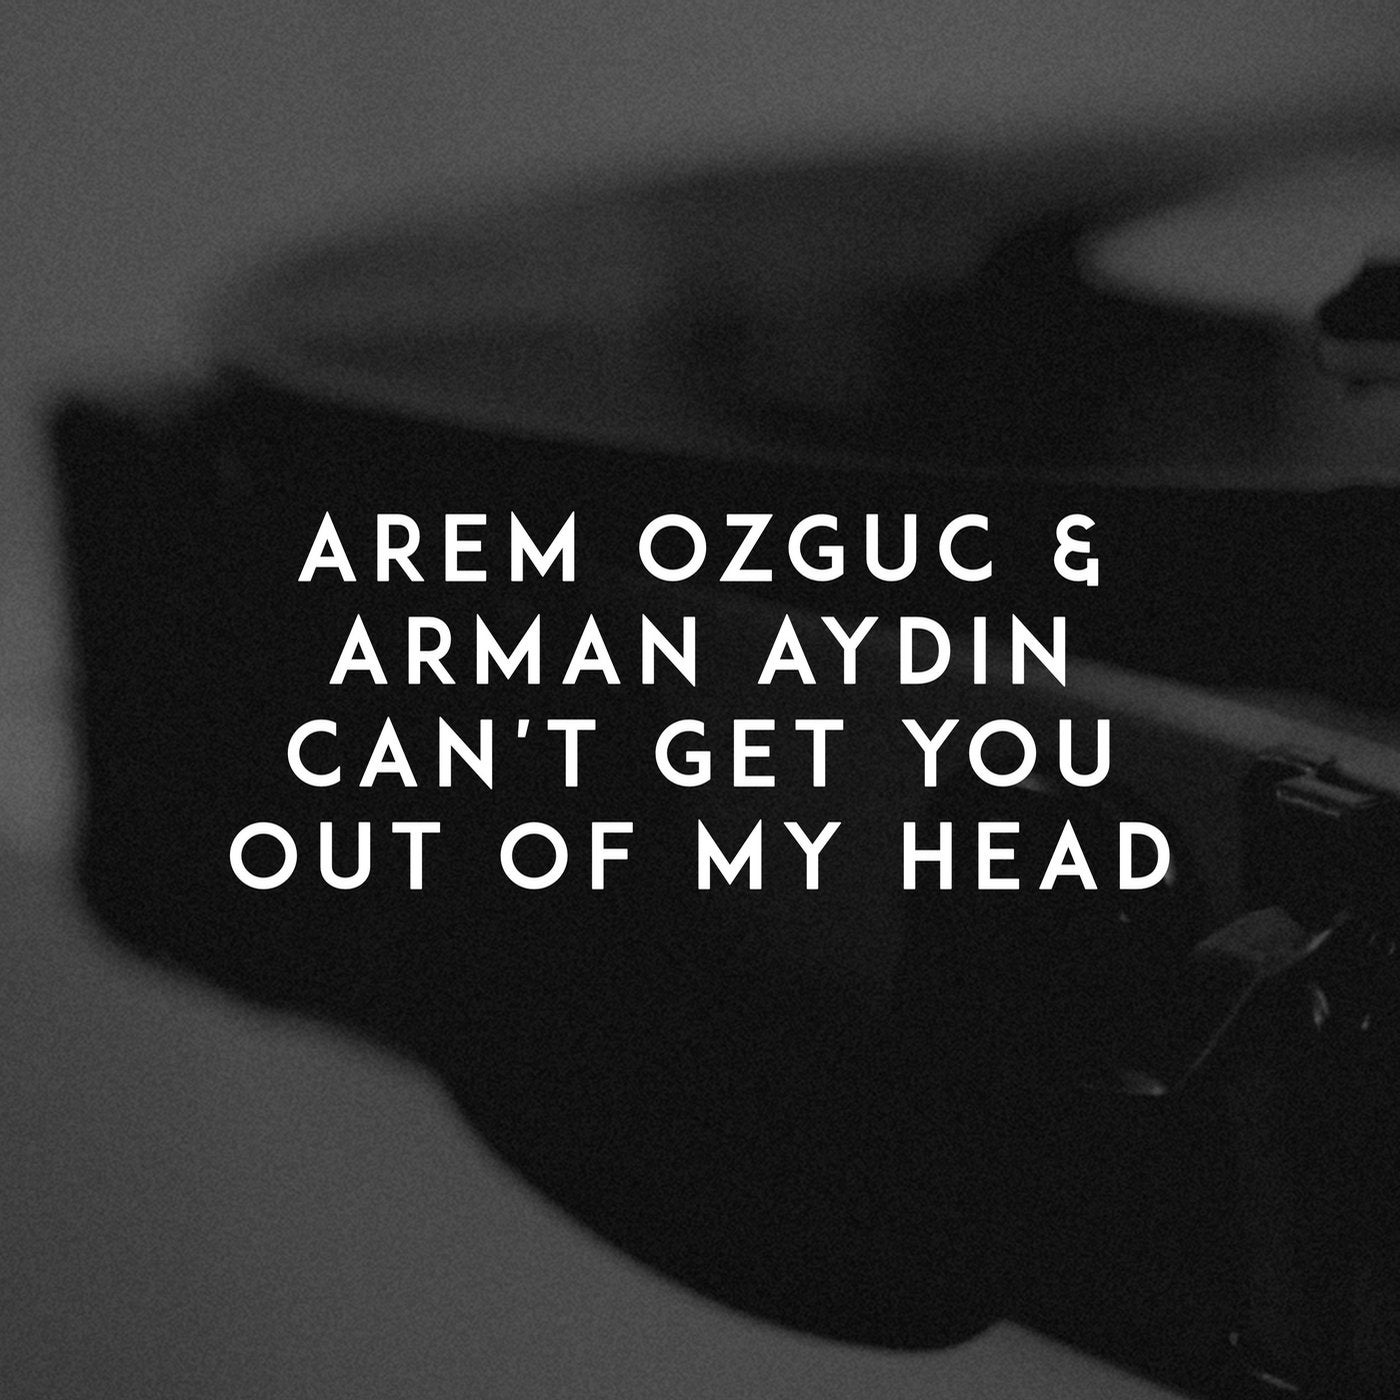 Can get out of my head перевод. Arem Ozguc. Cant get you out my head. Can't get out of my head альбом часы. Out of my head перевод.